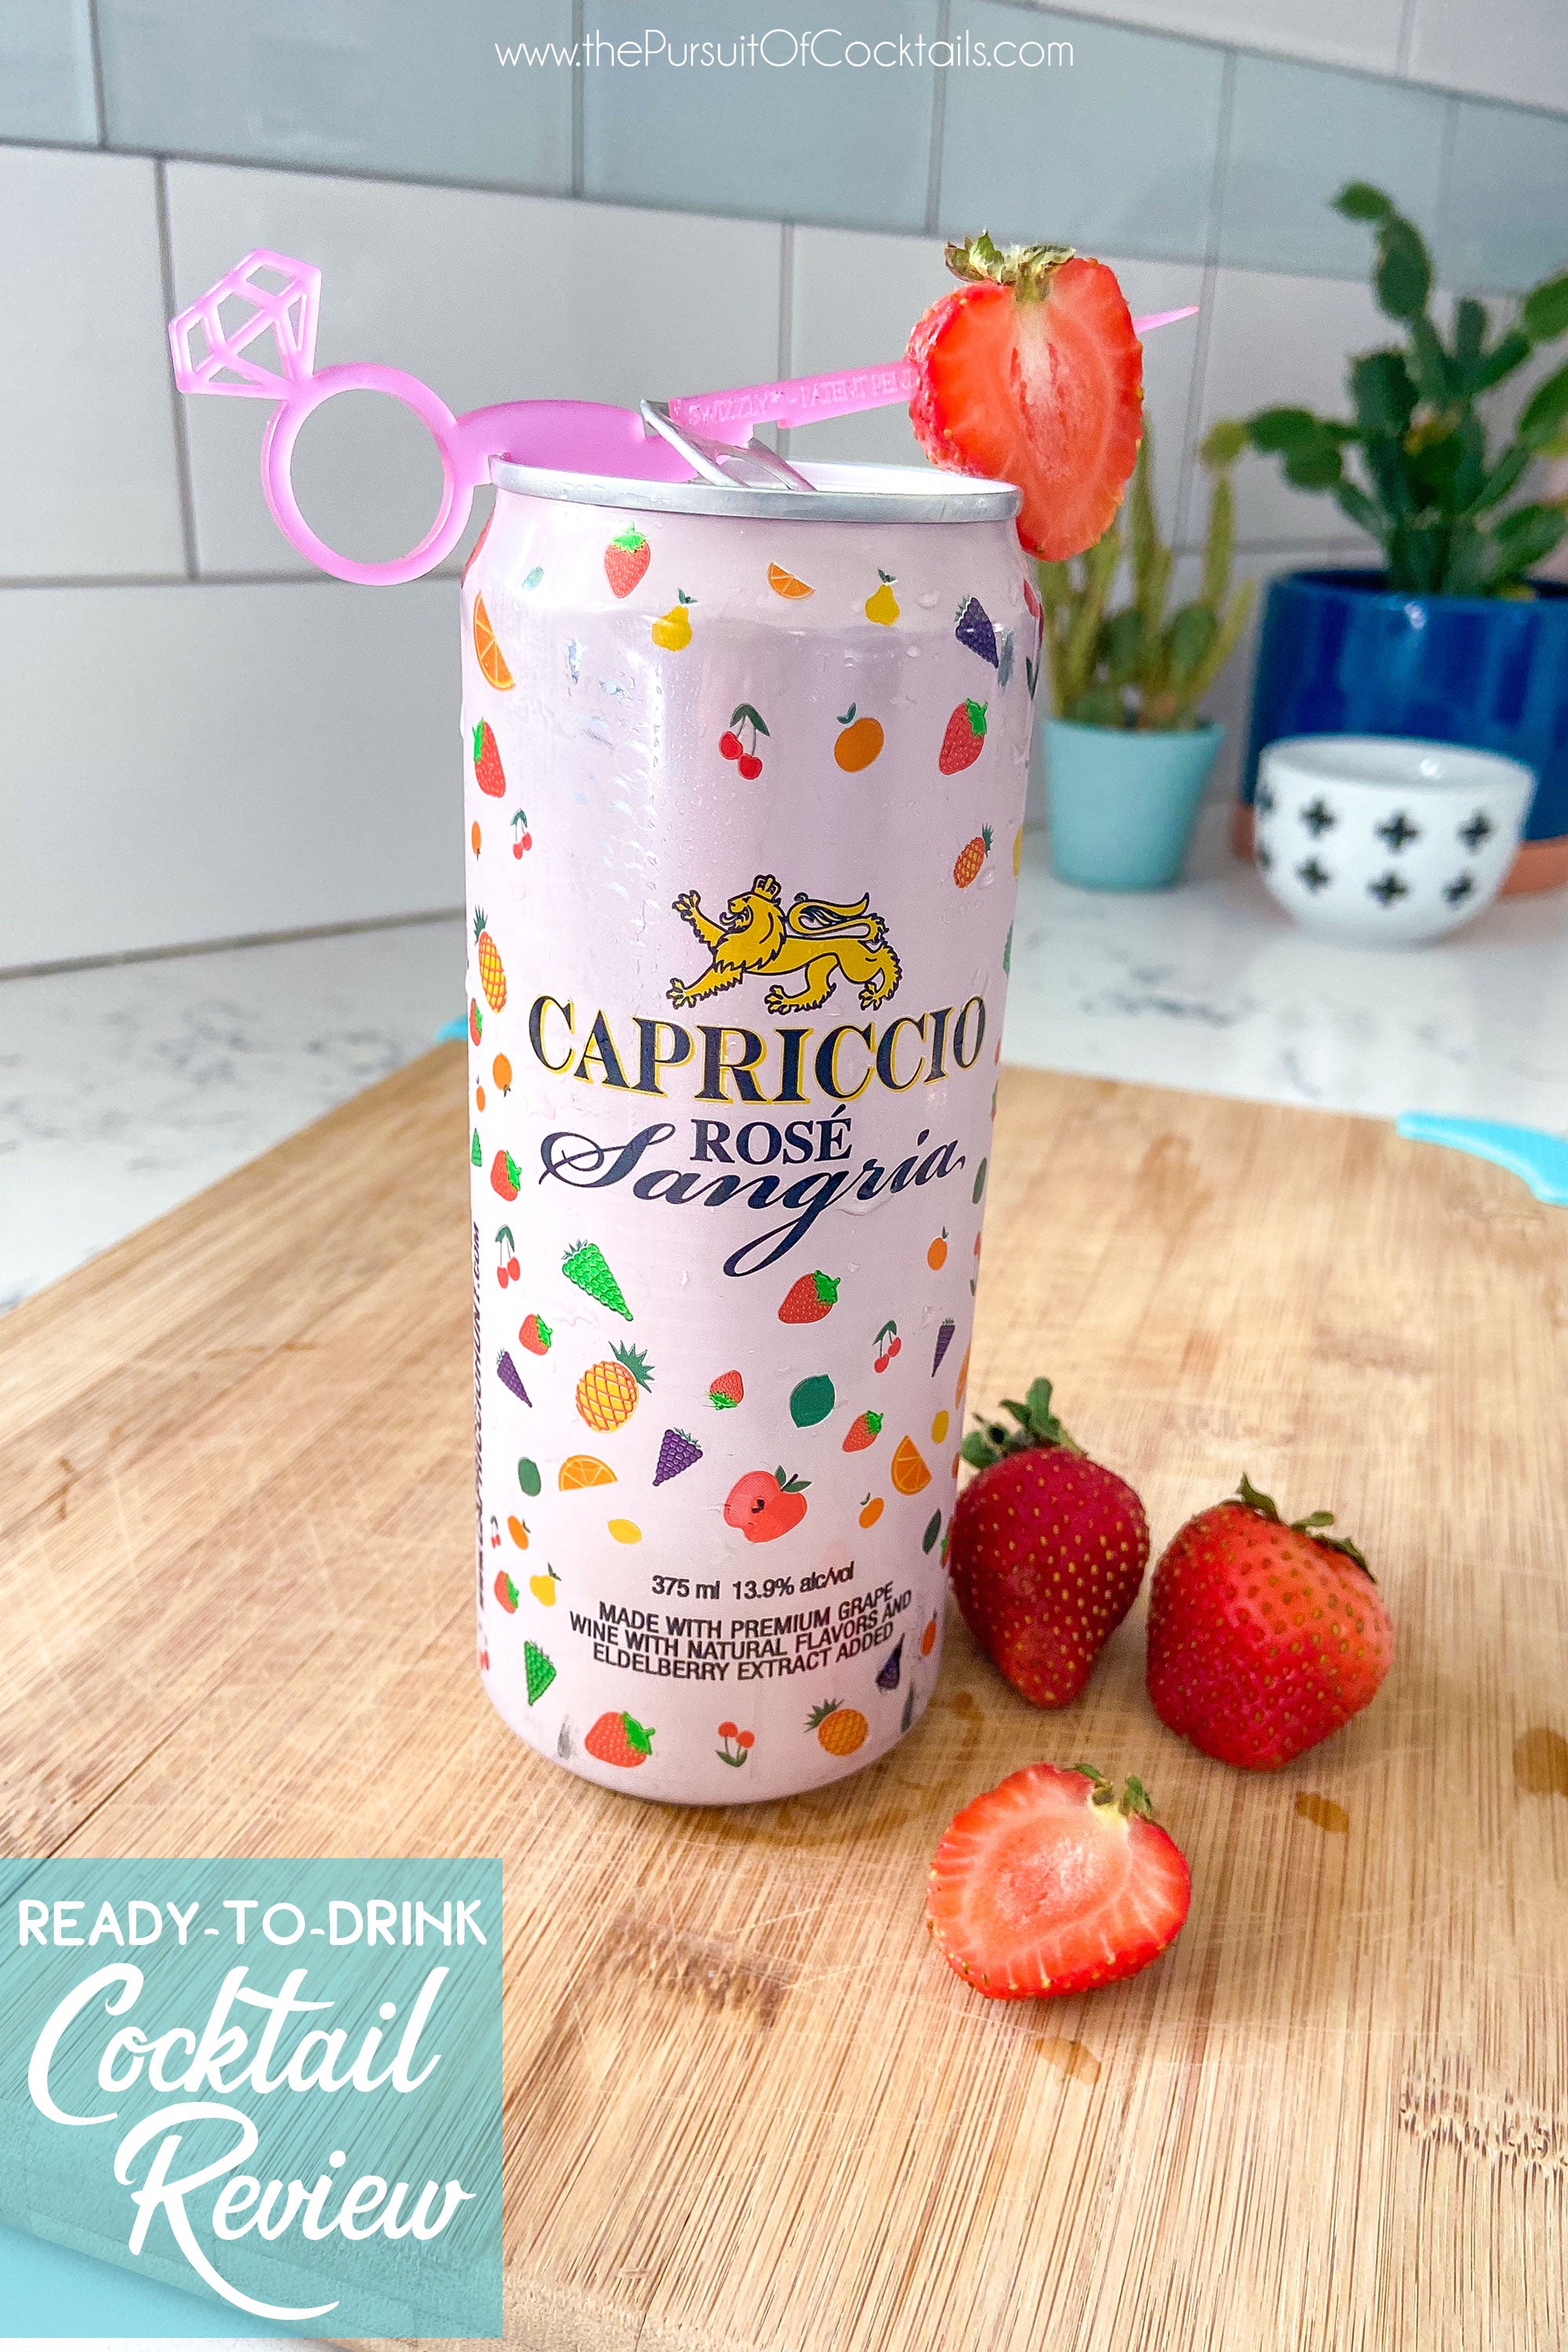 Capriccio Rose Sangria reviewed by The Pursuit of Cocktails